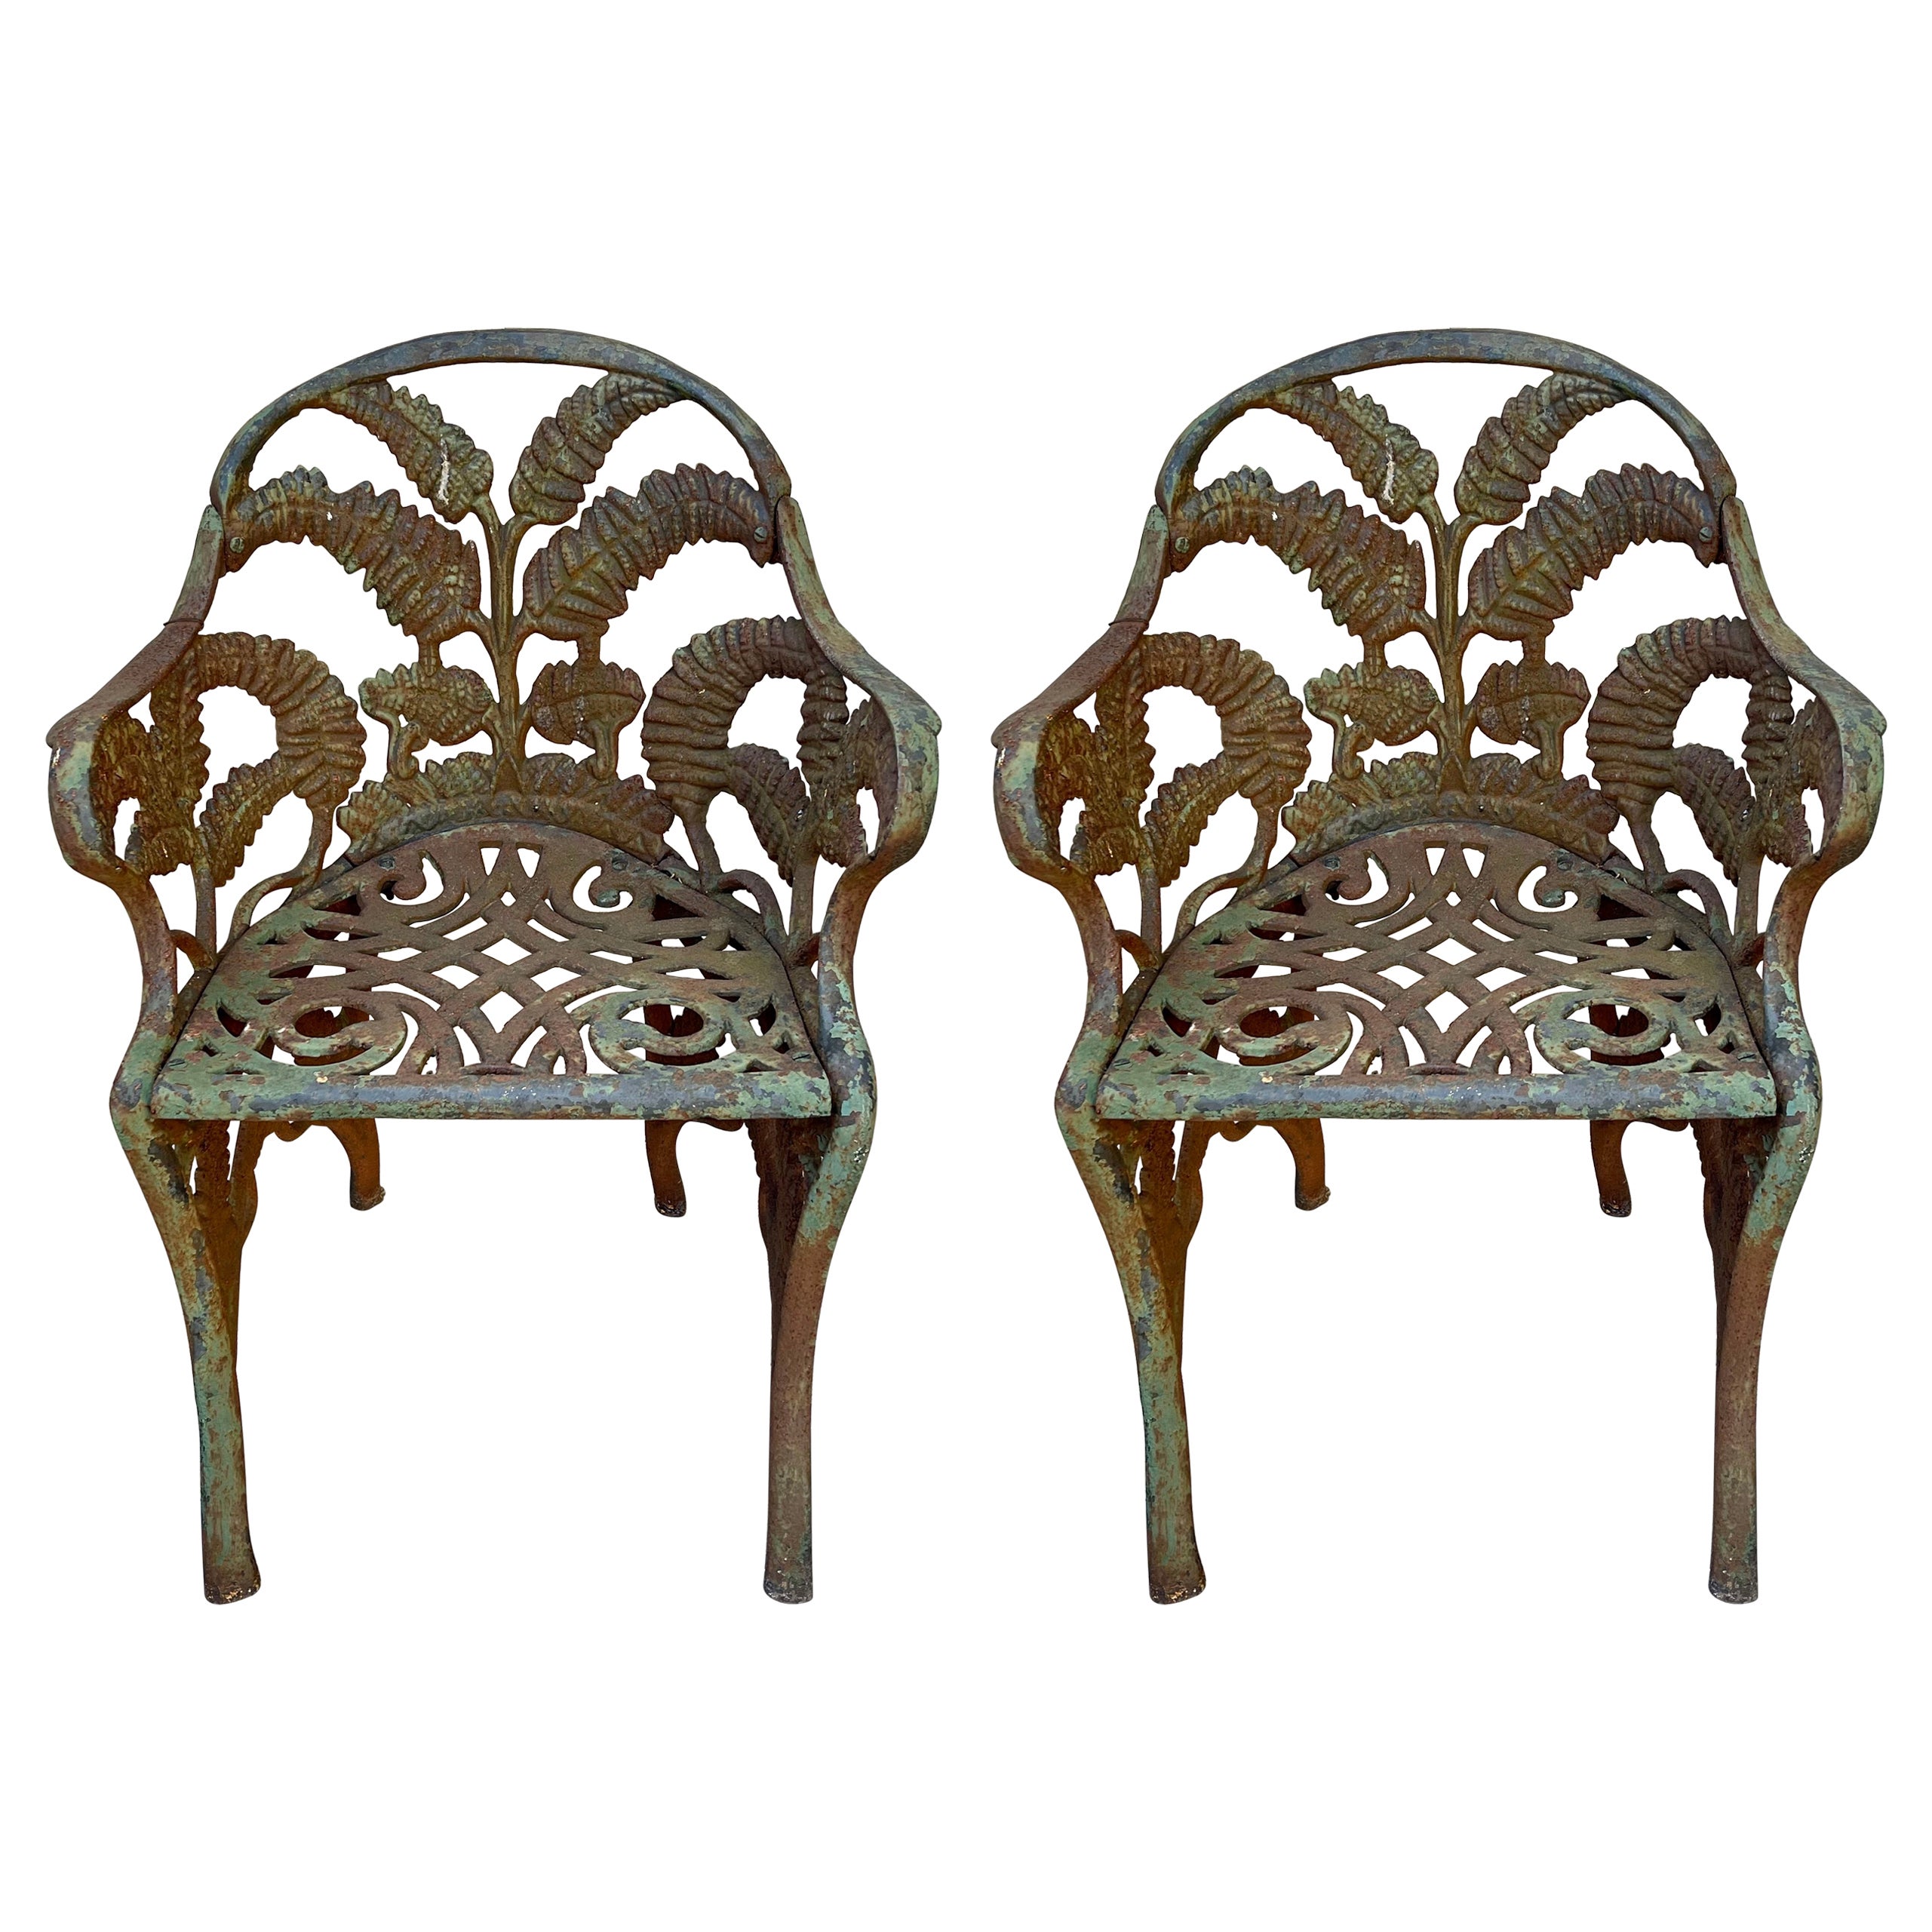 Pair of Coalbrookdale Style Fern and Blackberry Pattern Cast Iron Garden Chairs For Sale